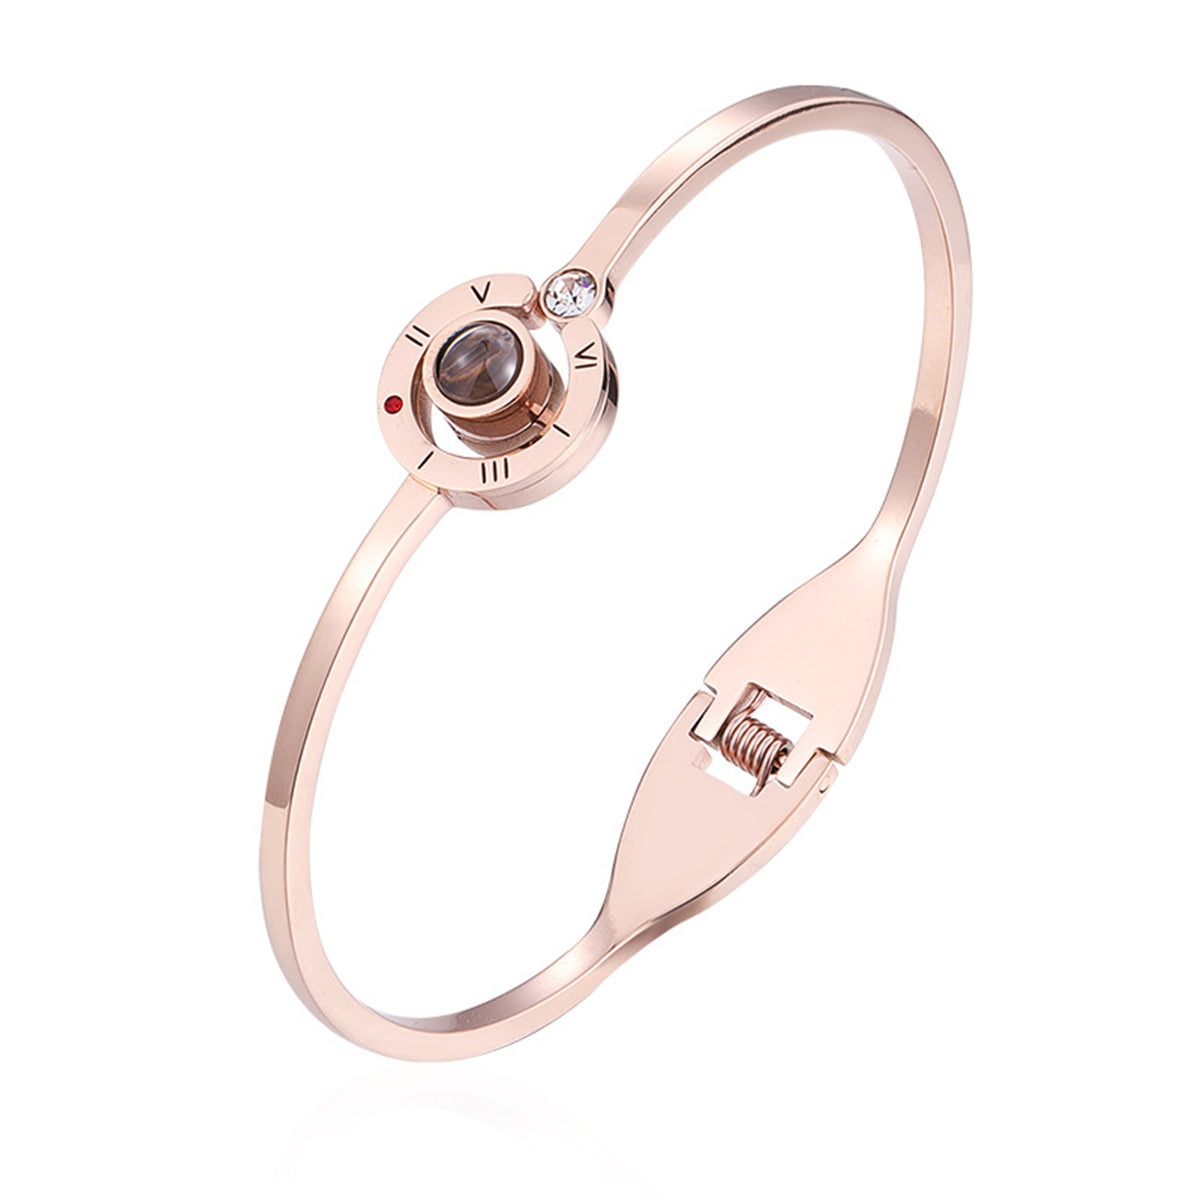 Cubic Zirconia & 18K Rose Gold-Plated 'I Love You' Roman Numeral Hinge Bangle